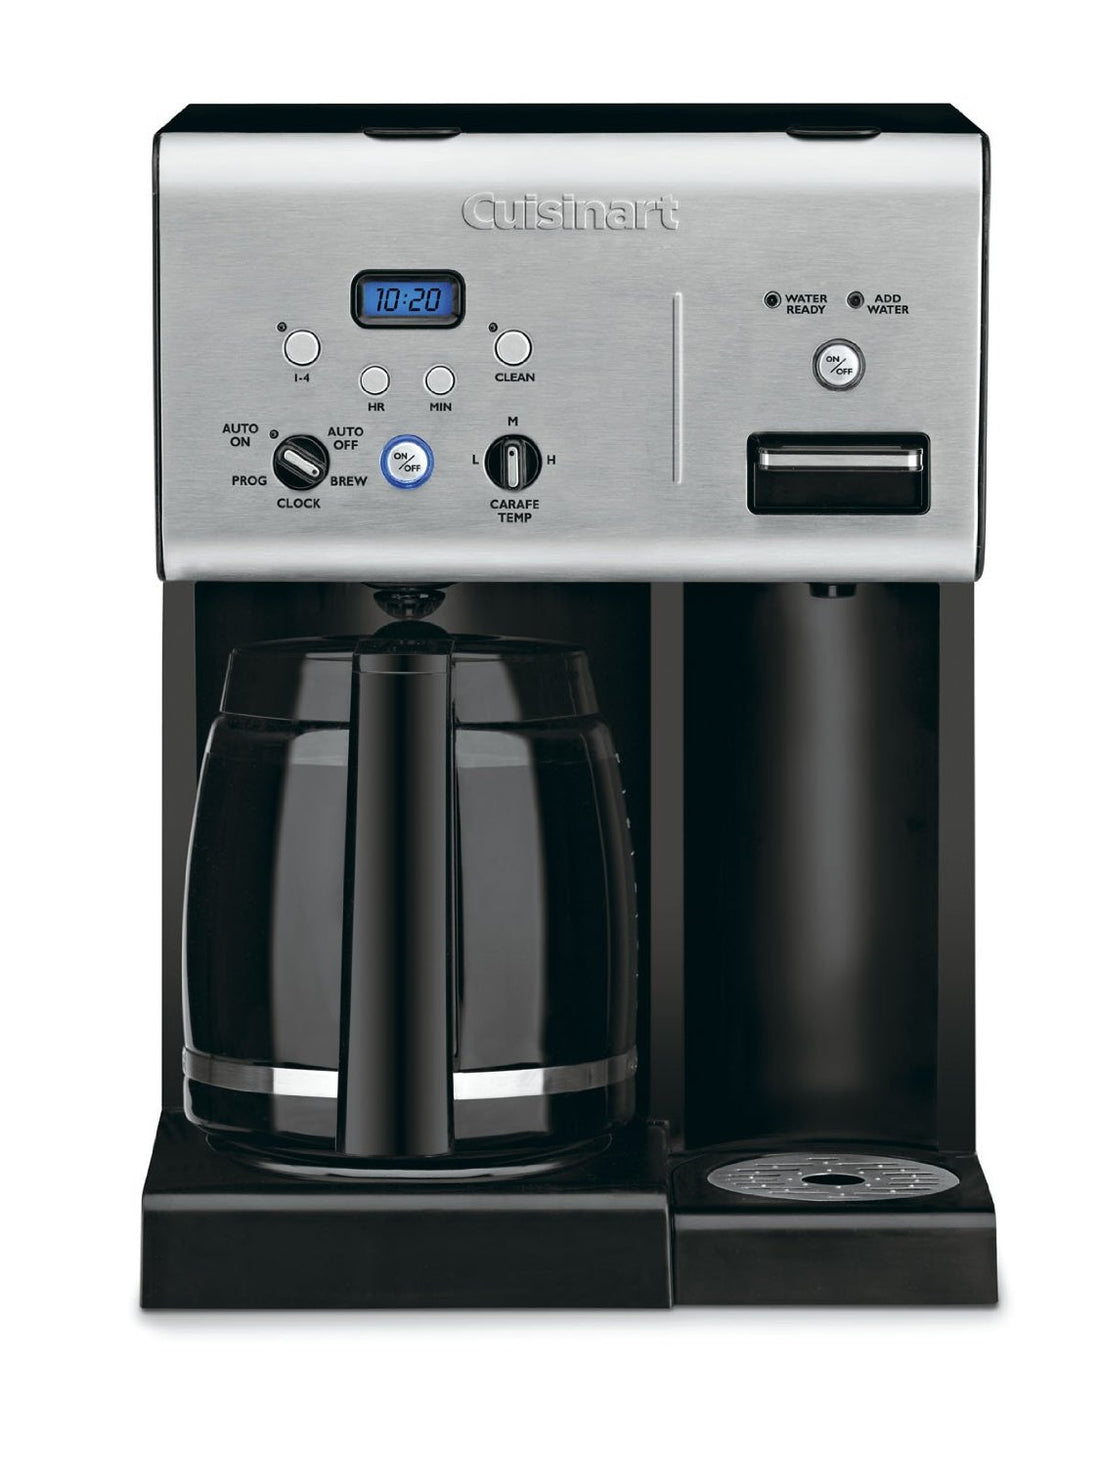 Is There an Automatic Drip Coffee Maker Without Plastic Parts? Explore